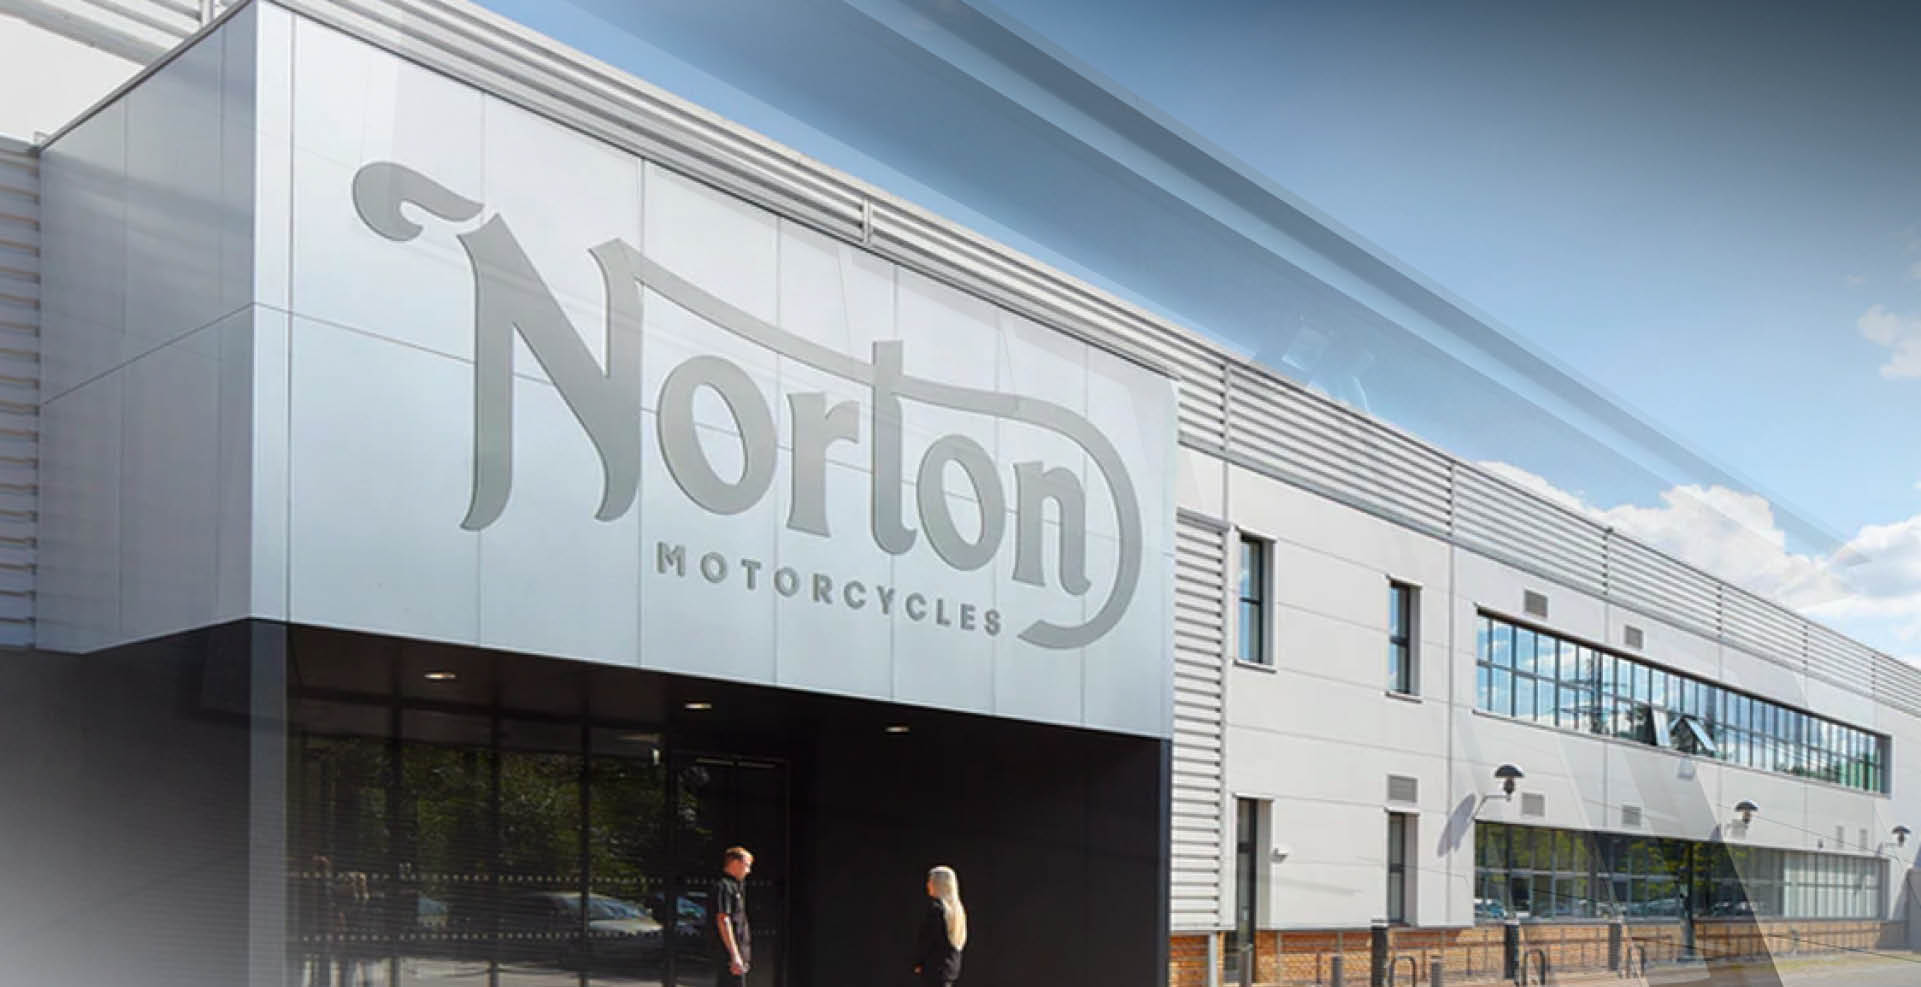 An electric partnership with Norton motorcycles